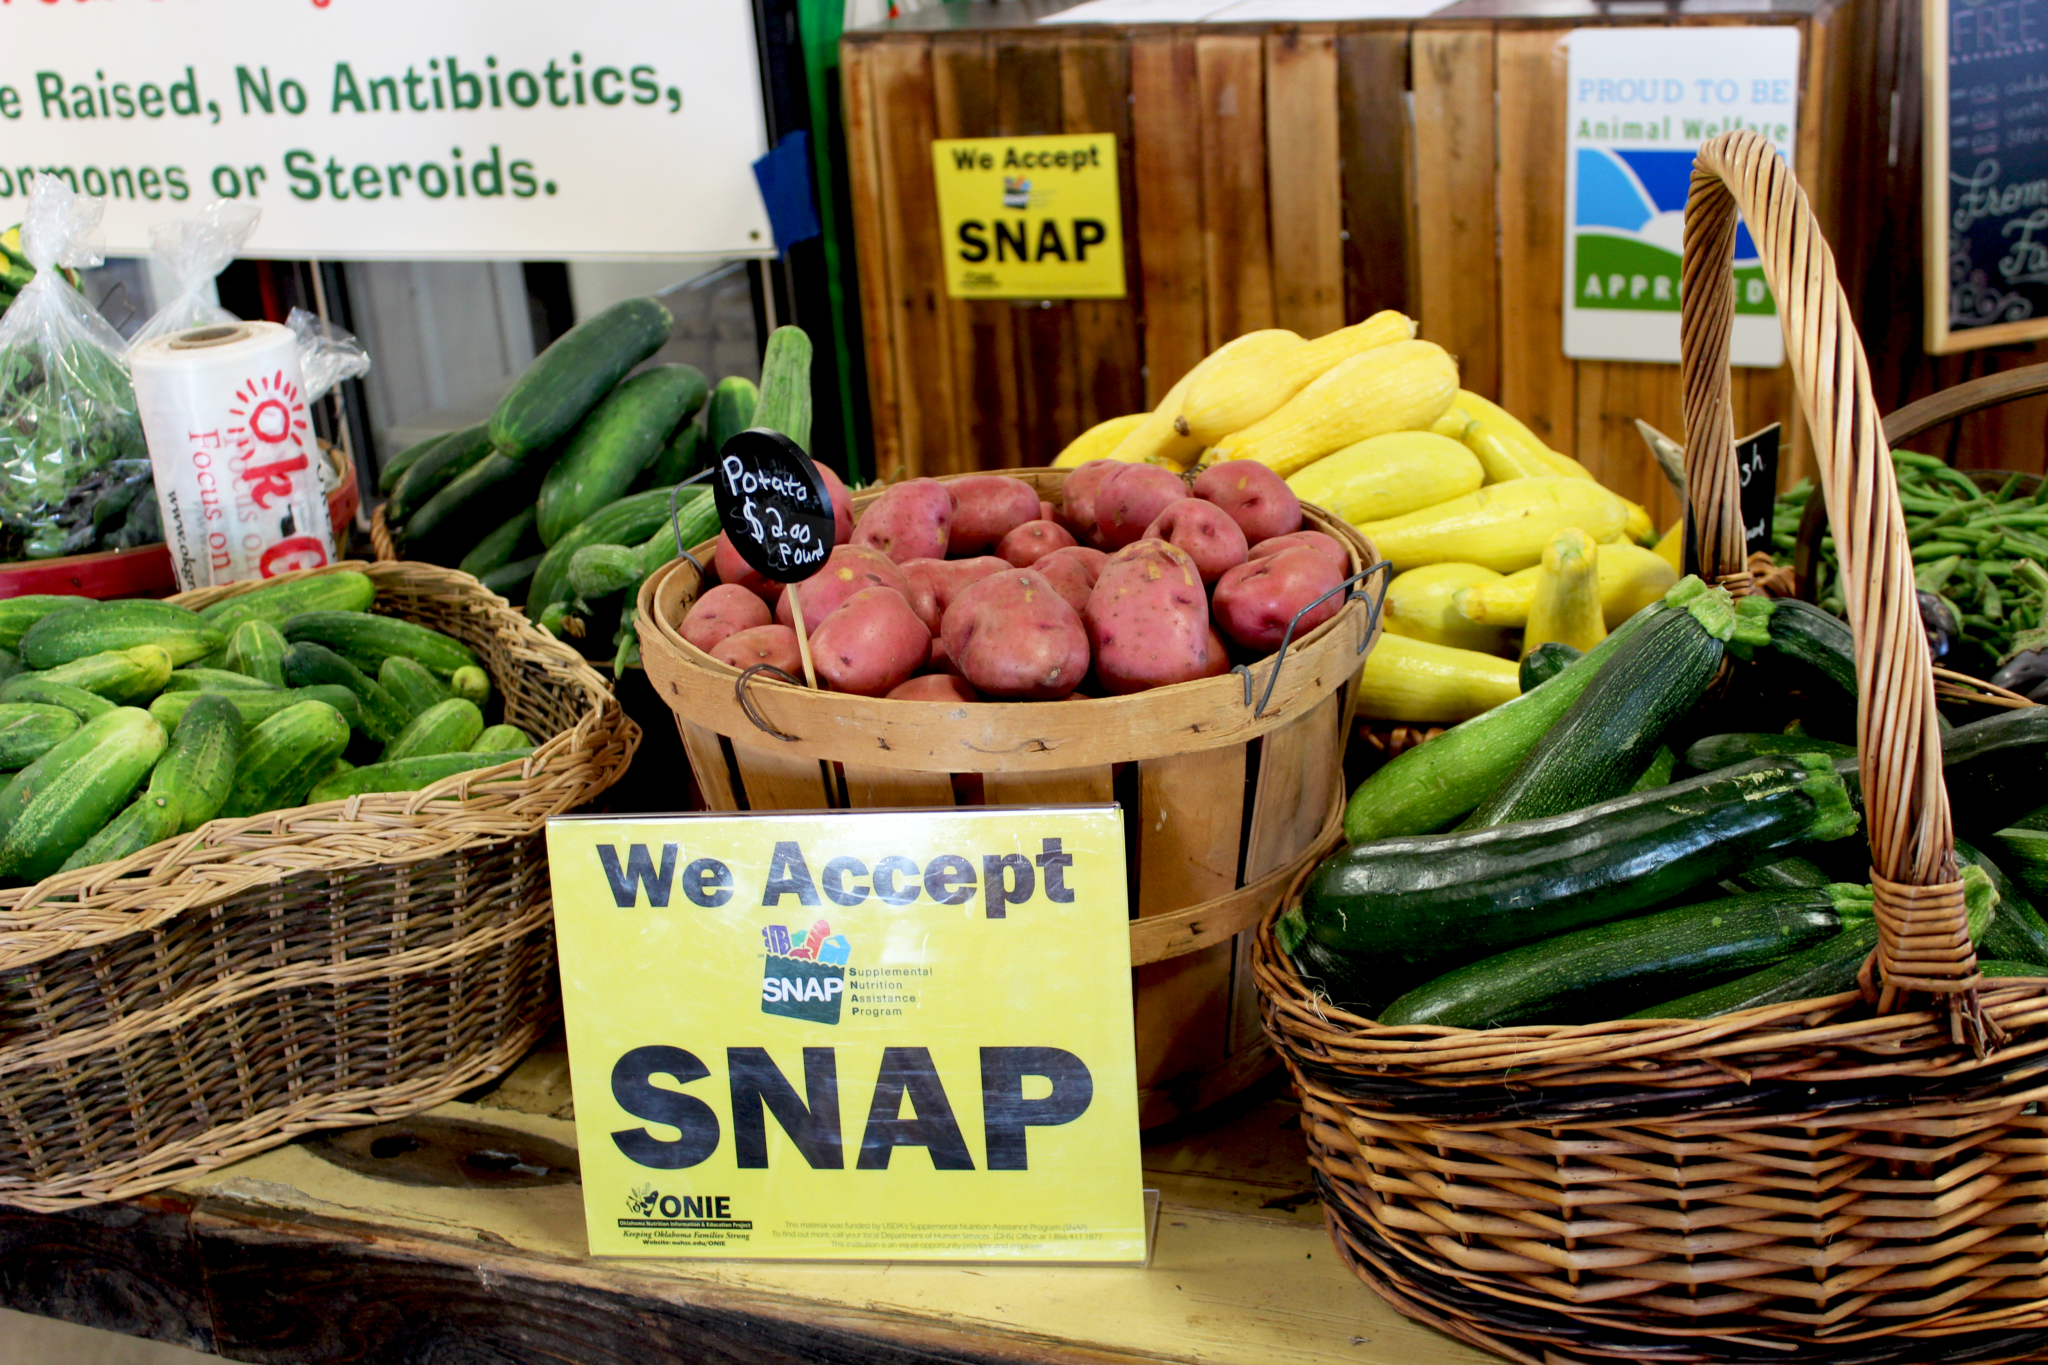 Farmers Market Produce with SNAP sign